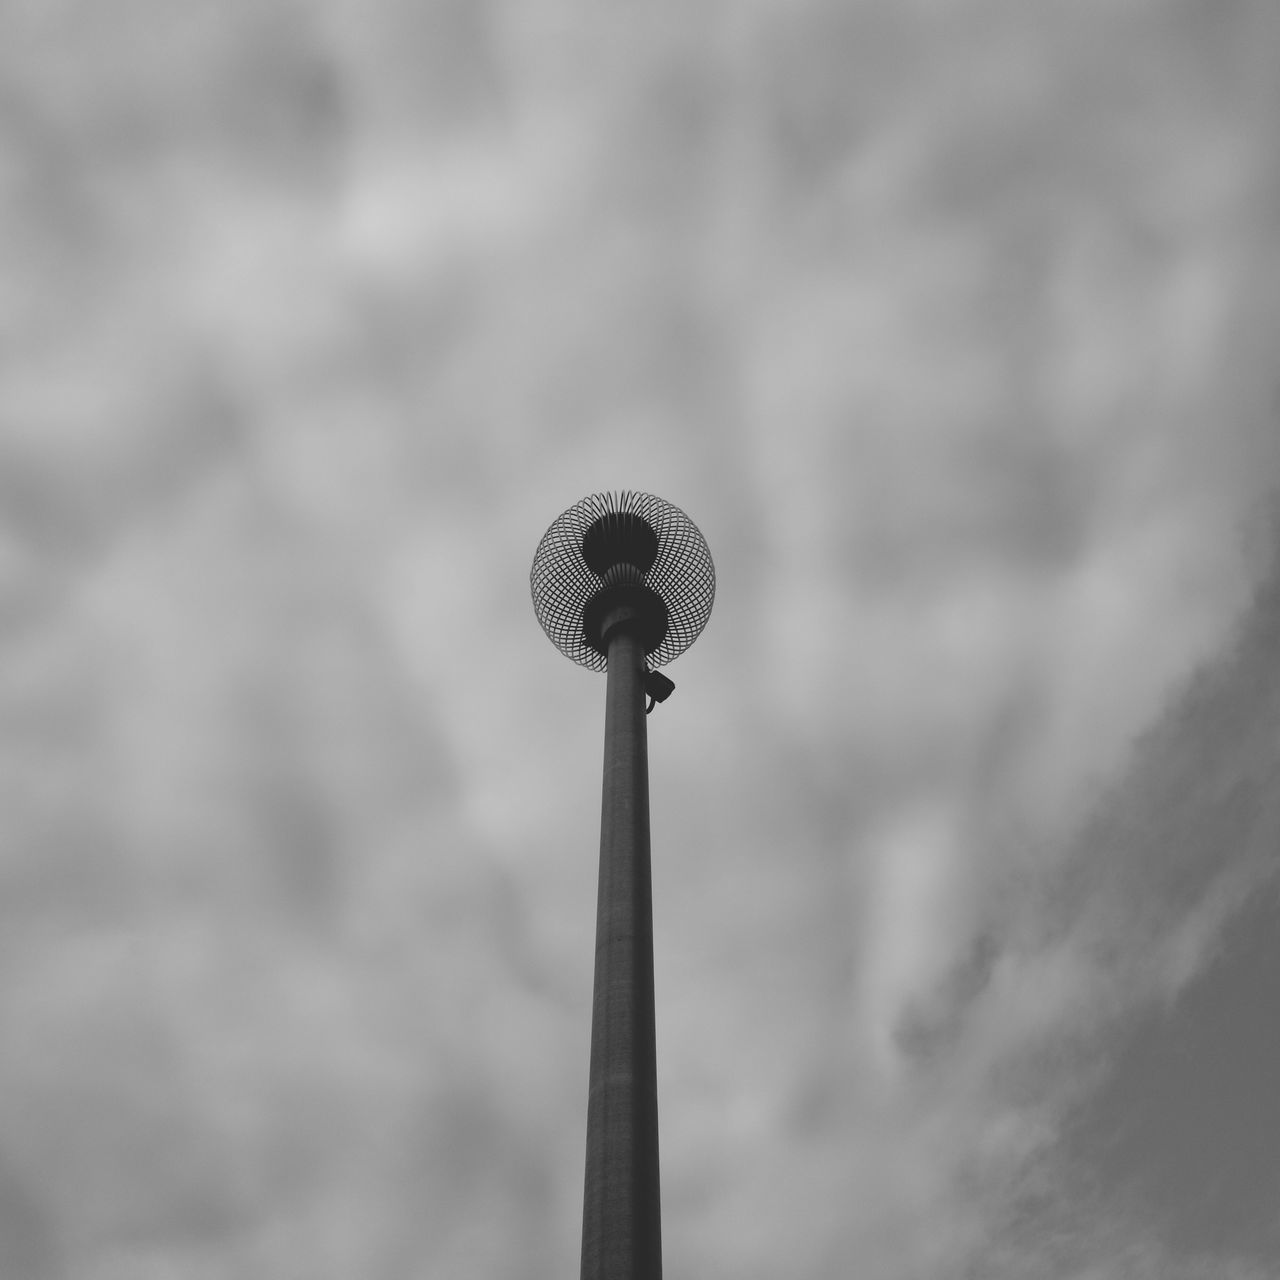 black and white, cloud, sky, monochrome, monochrome photography, street light, low angle view, no people, white, communication, nature, technology, black, outdoors, day, architecture, broadcasting, lighting, overcast, street, wind, built structure, light